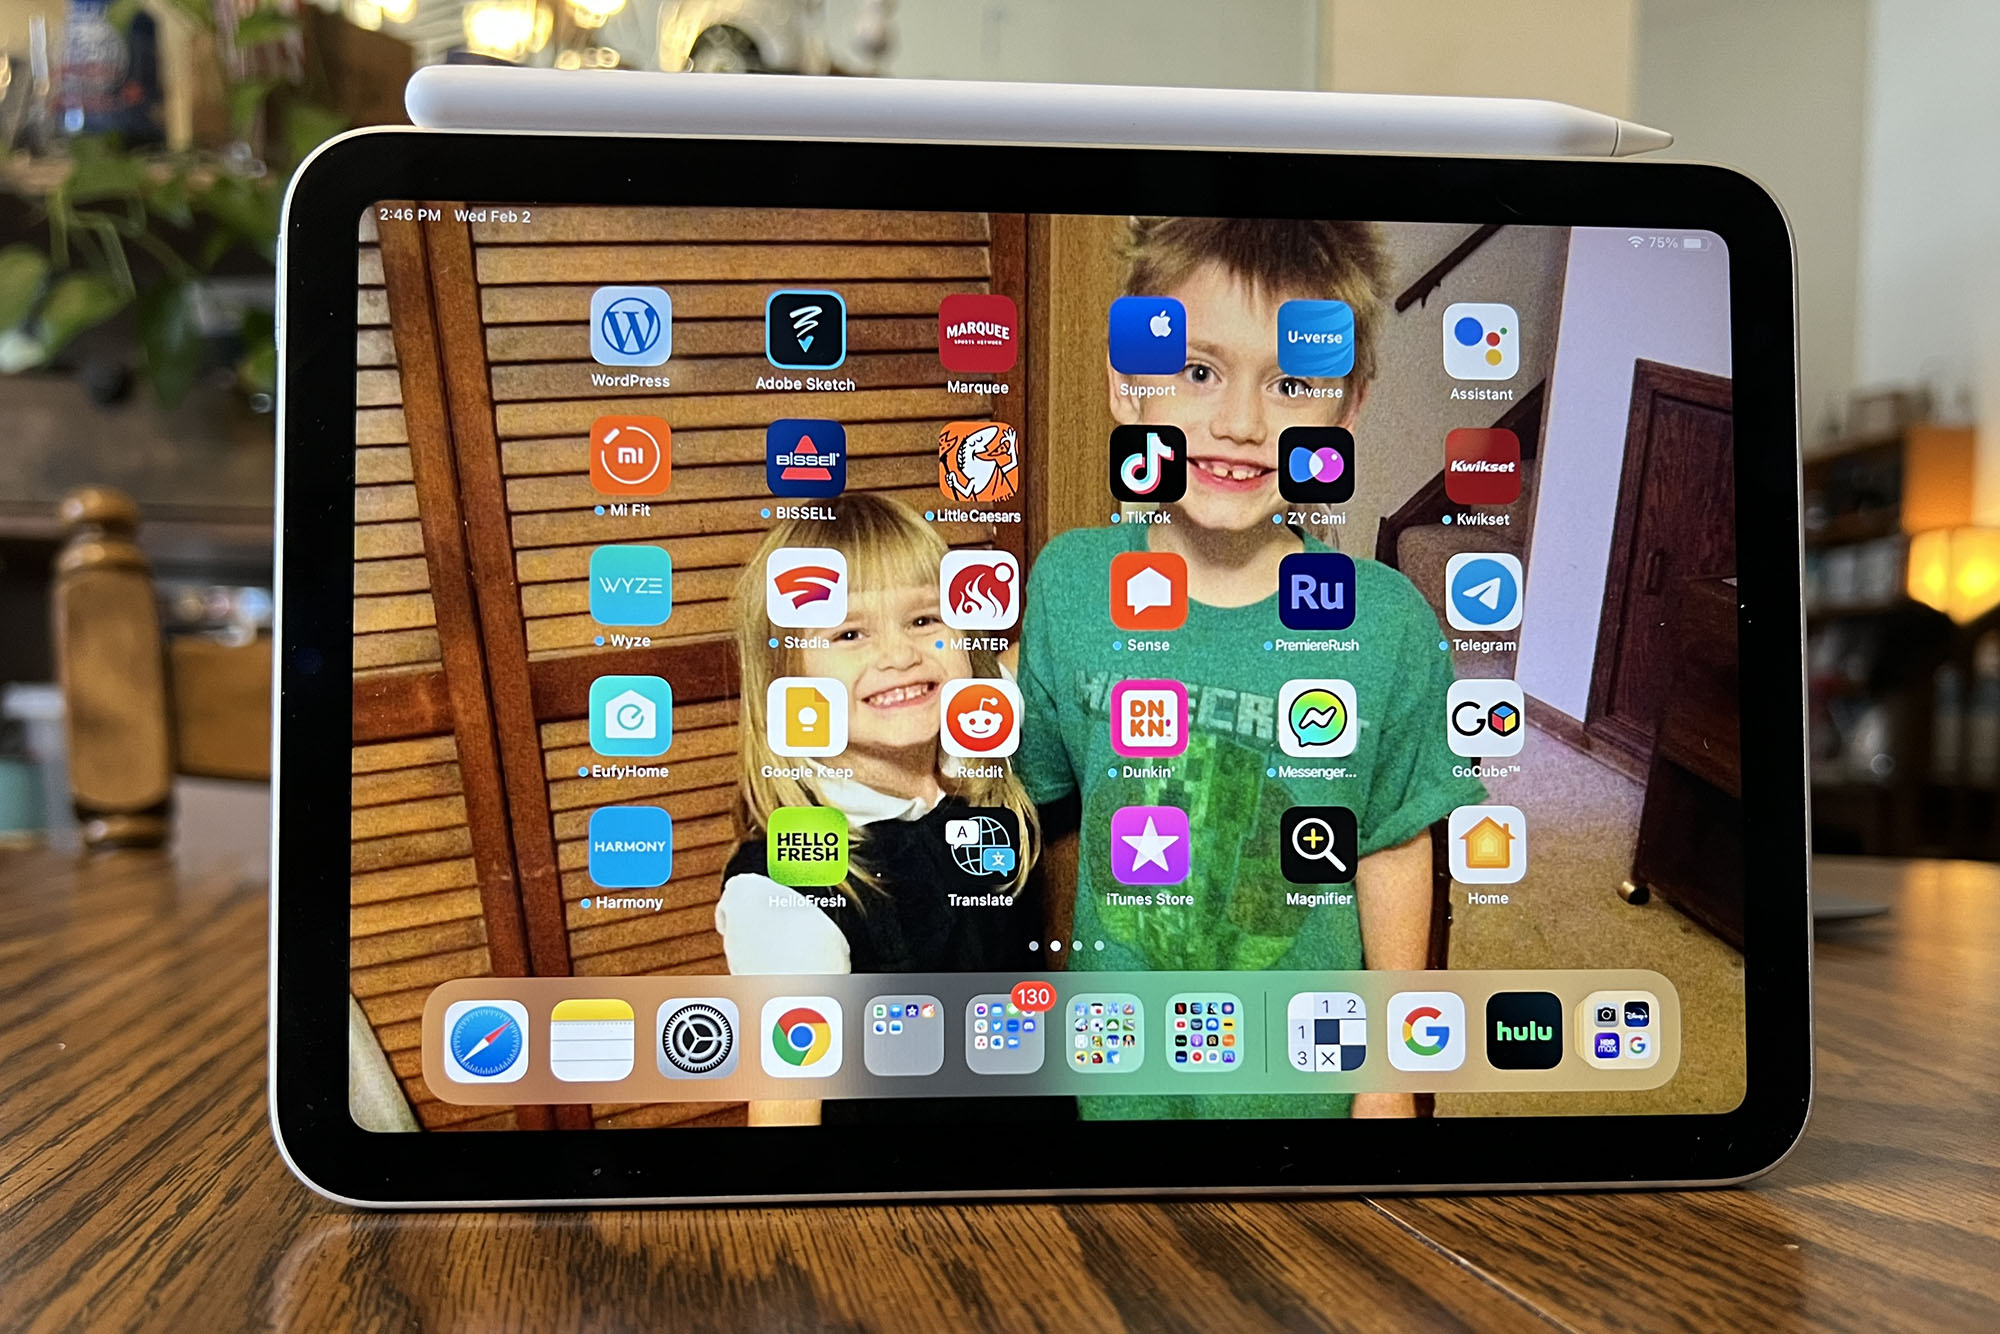 An iPad Mini in landscape mode displaying its home screen.